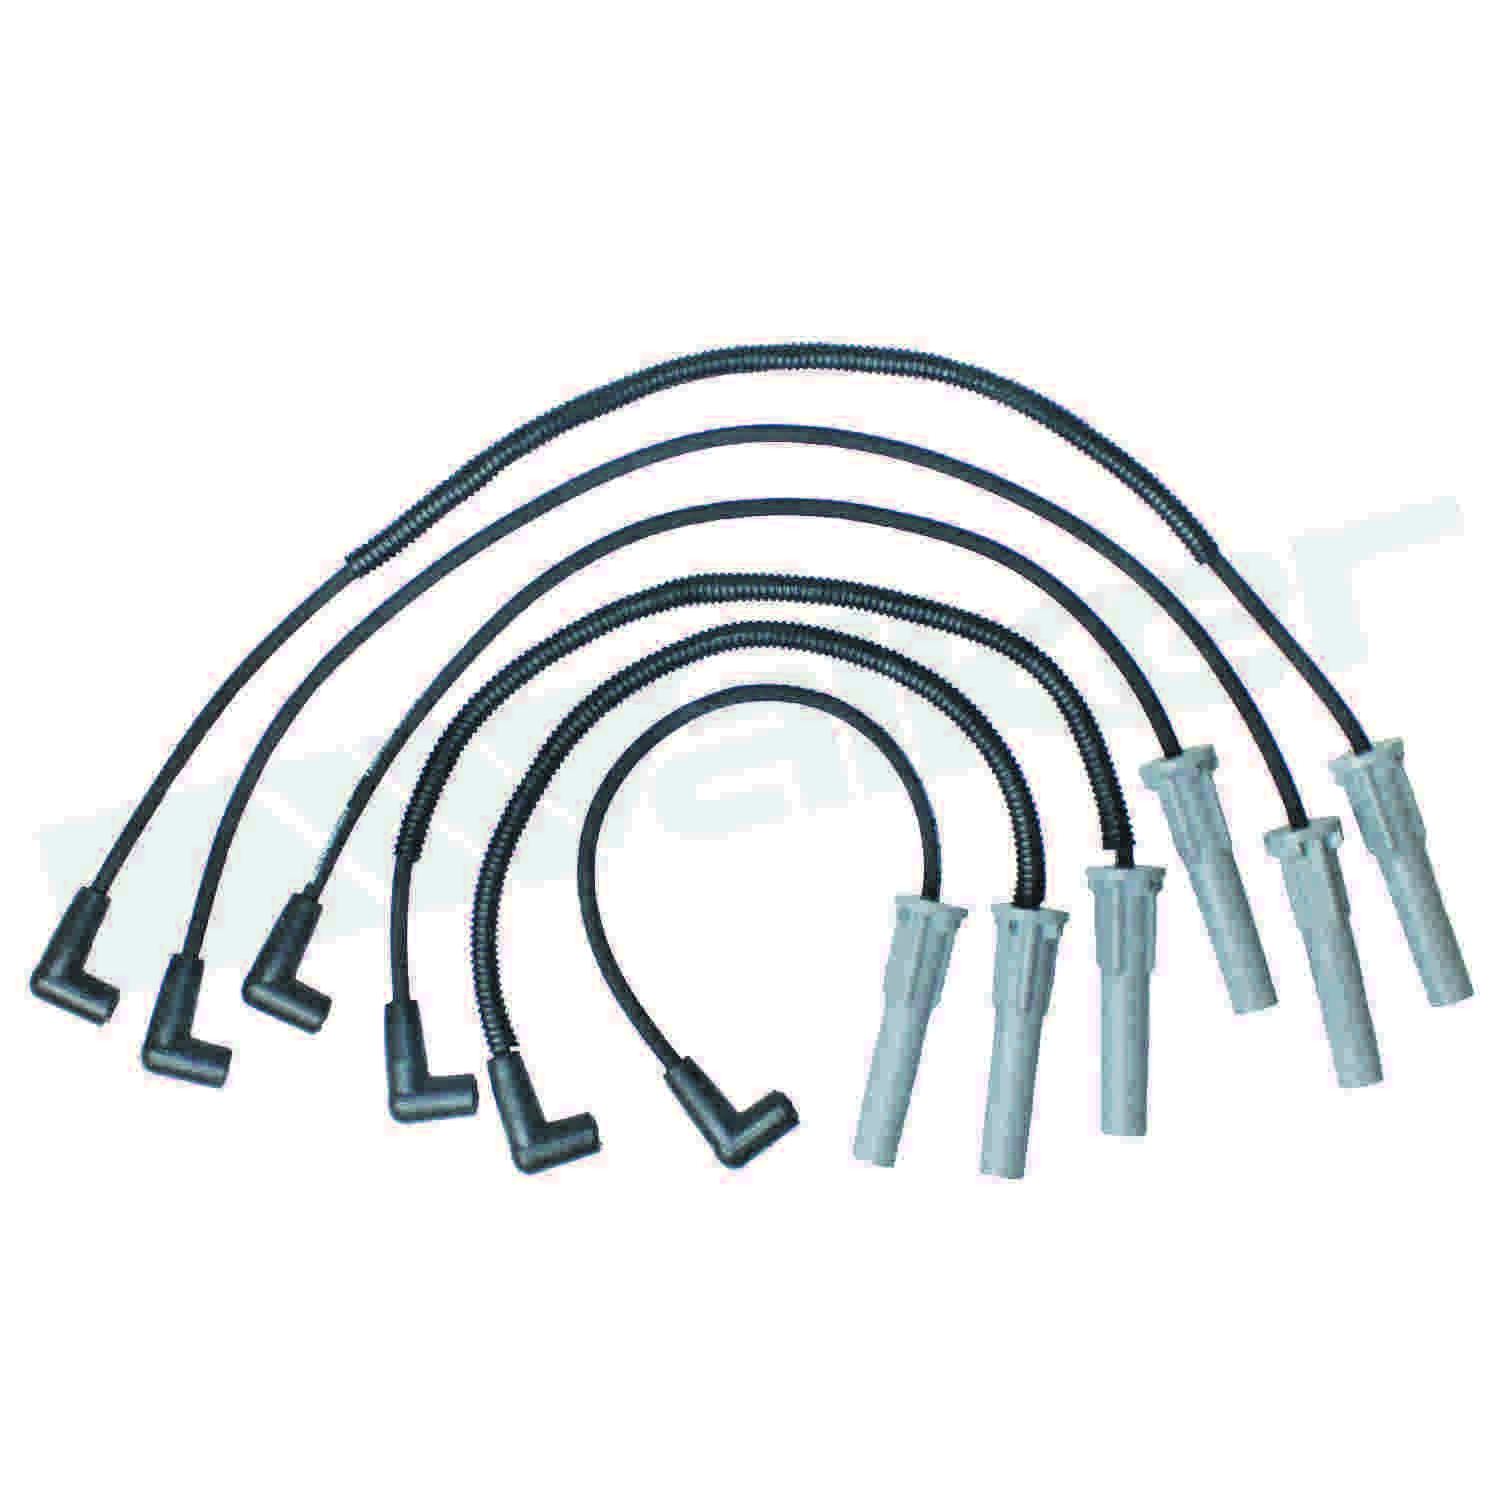 ThunderCore-Ultra ThunderCore-Ultra 900-2082 Spark Plug Wire Set  top view frsport 900-2082